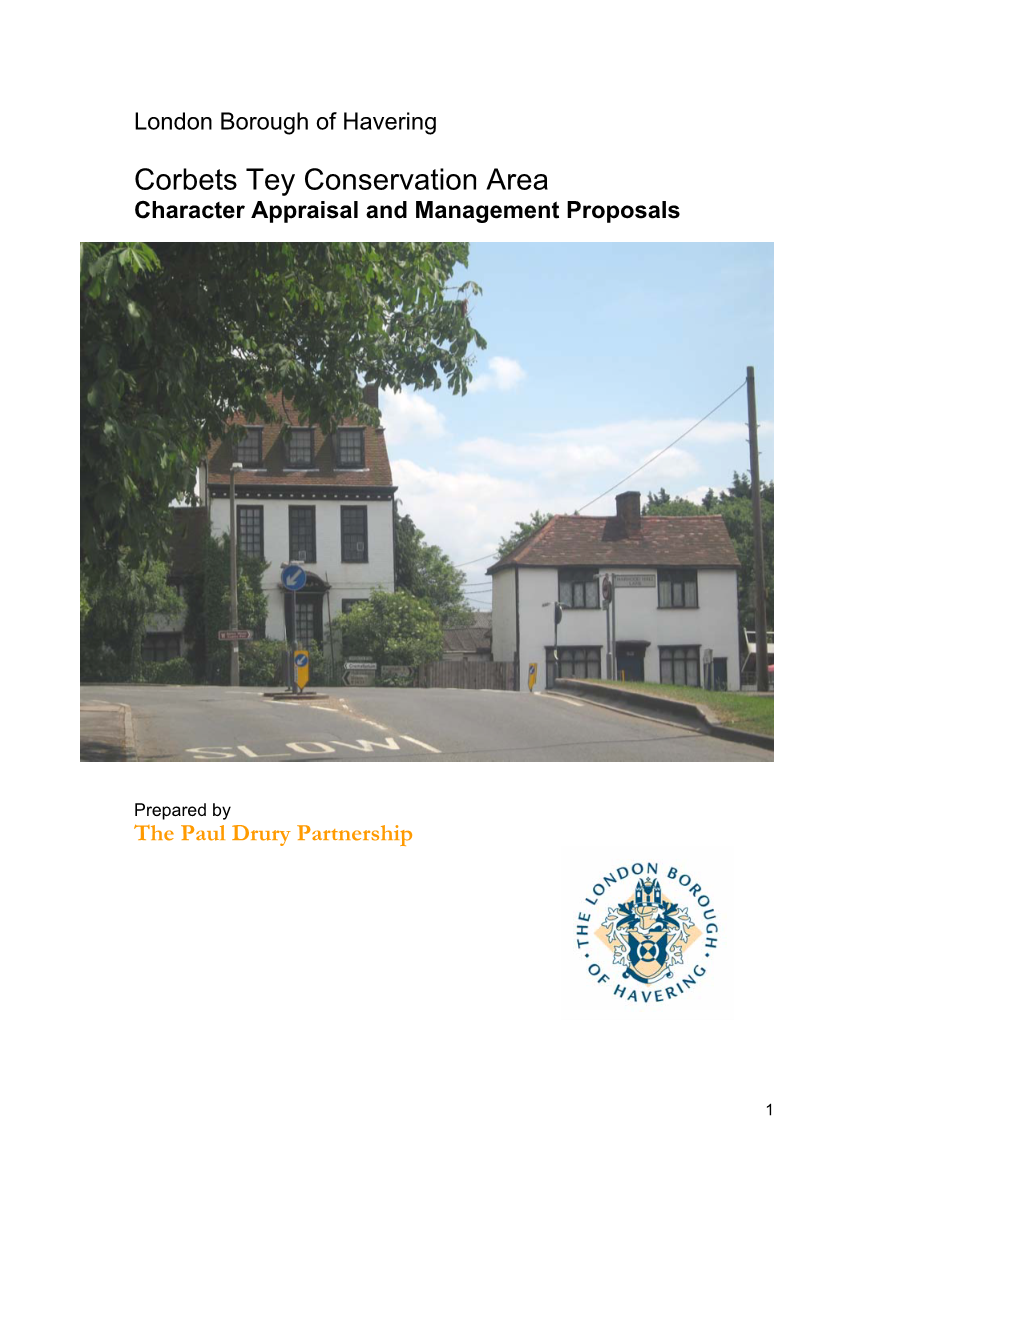 Corbets Tey Conservation Area Character Appraisal and Management Proposals